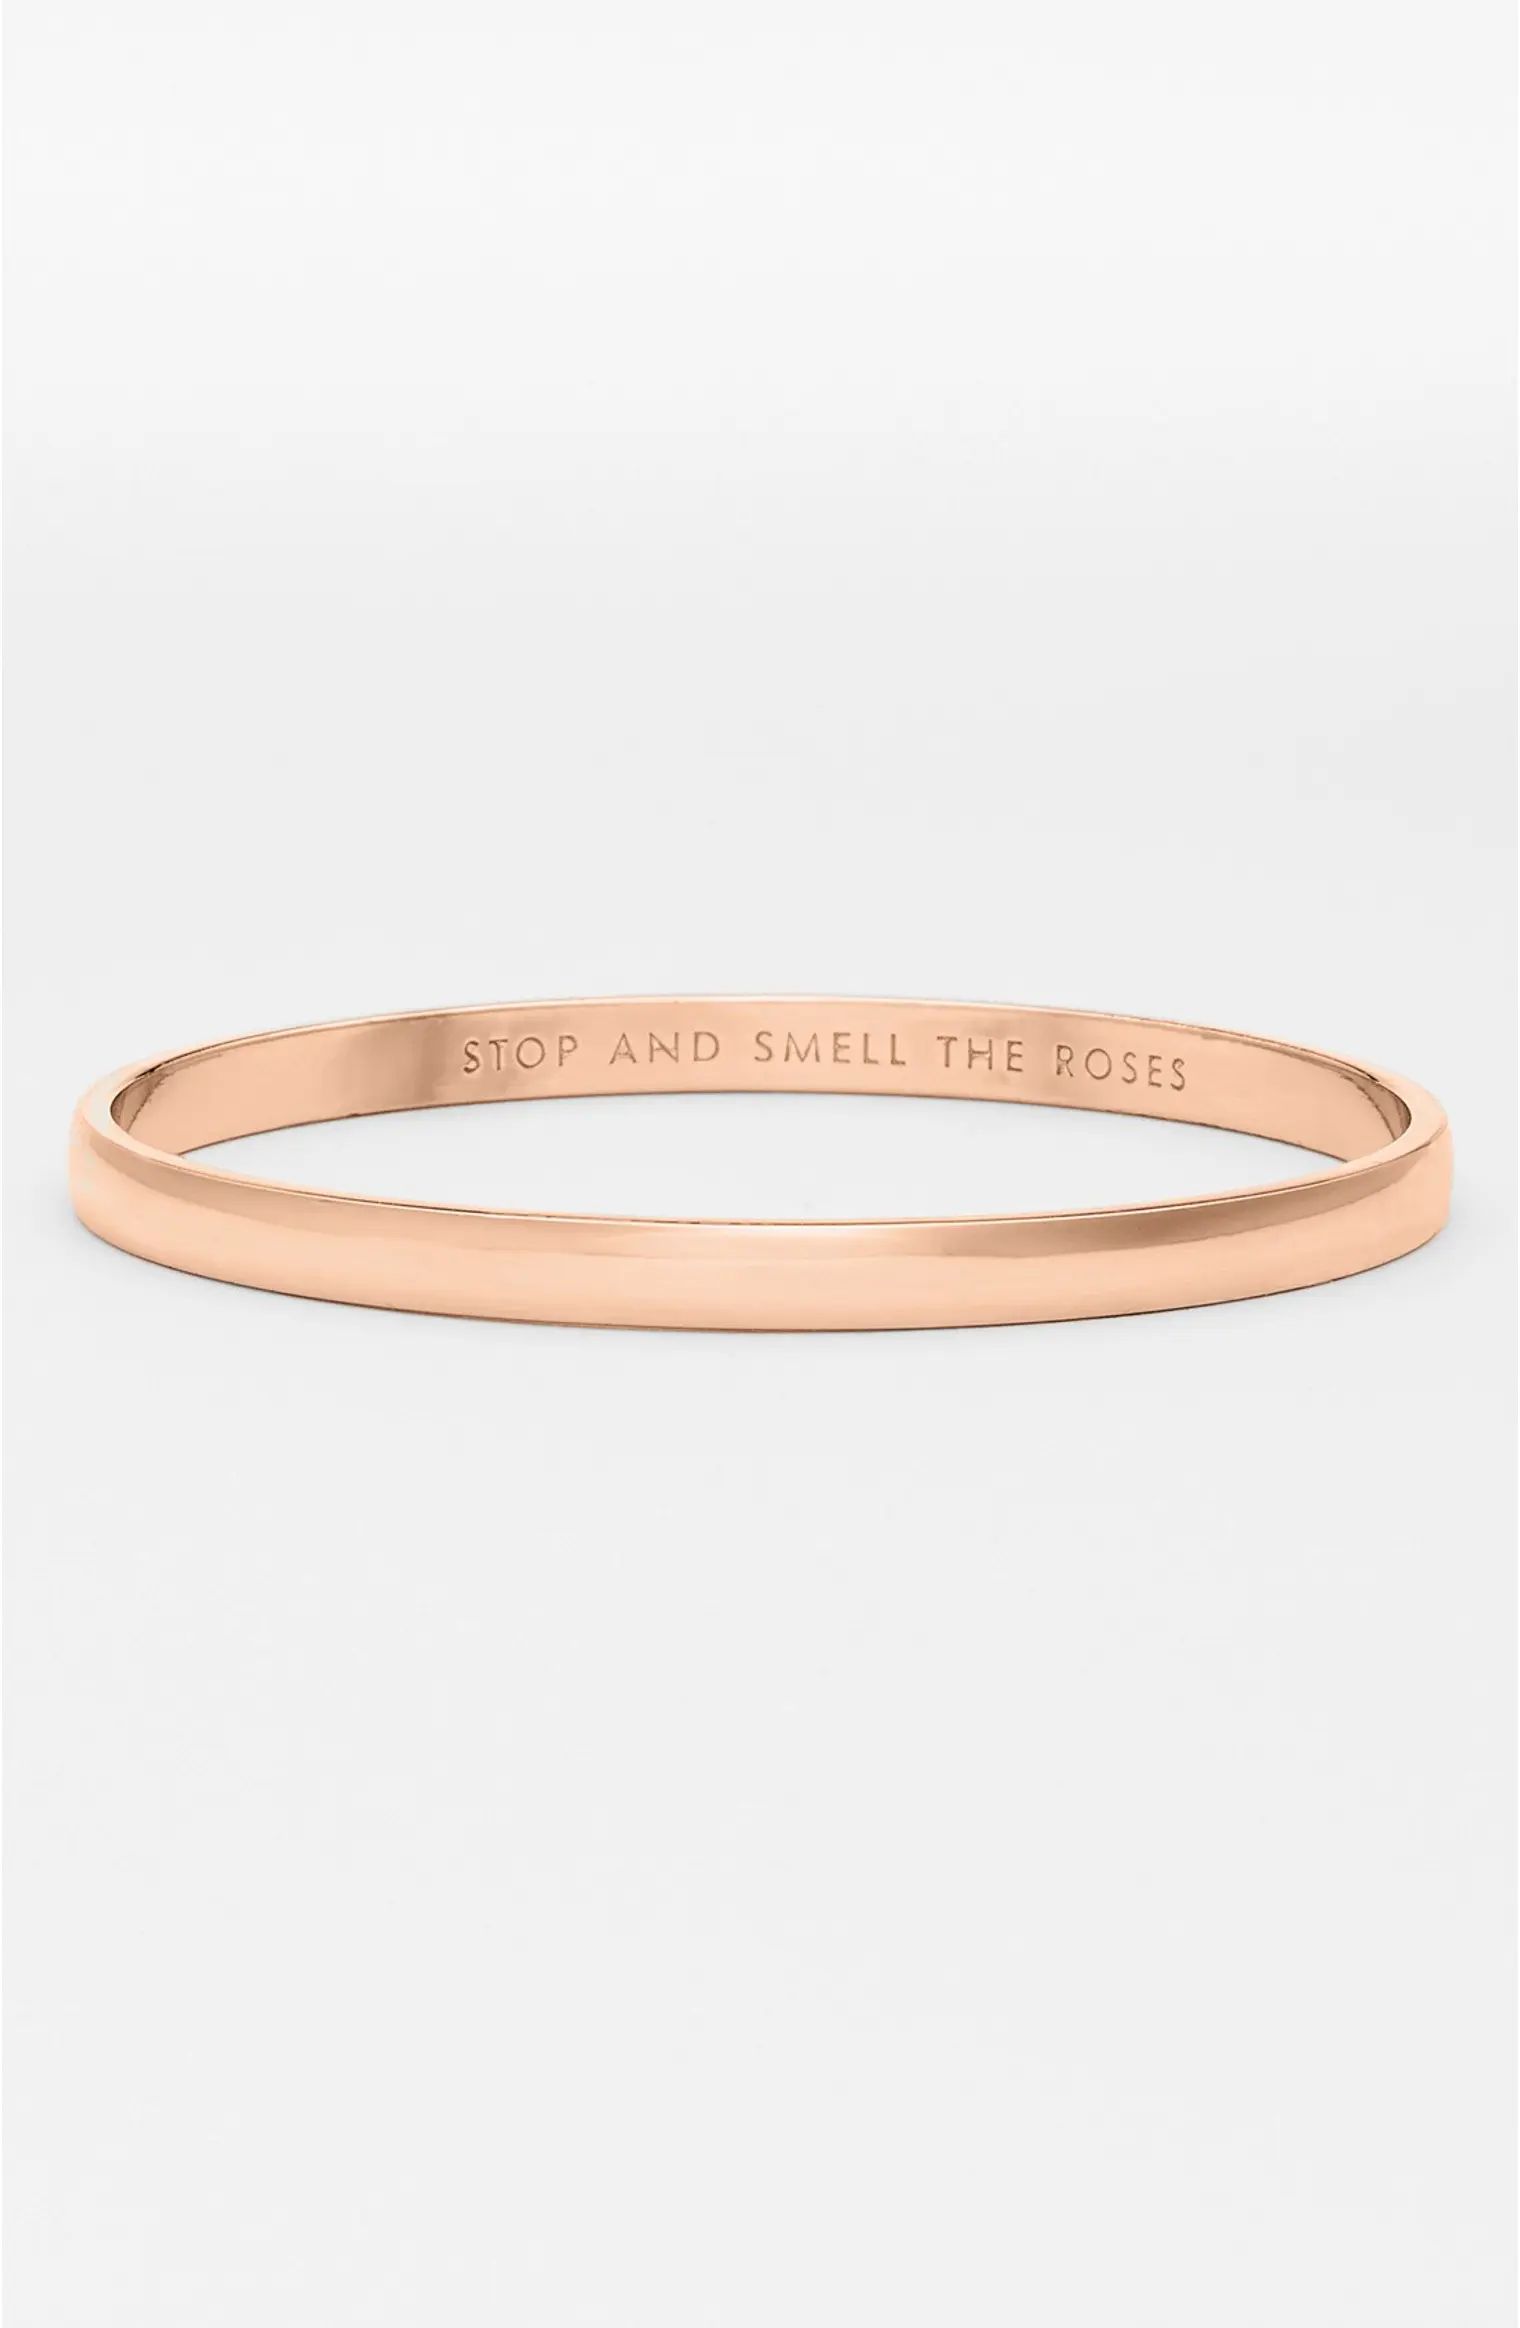 'idiom - stop and smell the roses' bangle | Nordstrom